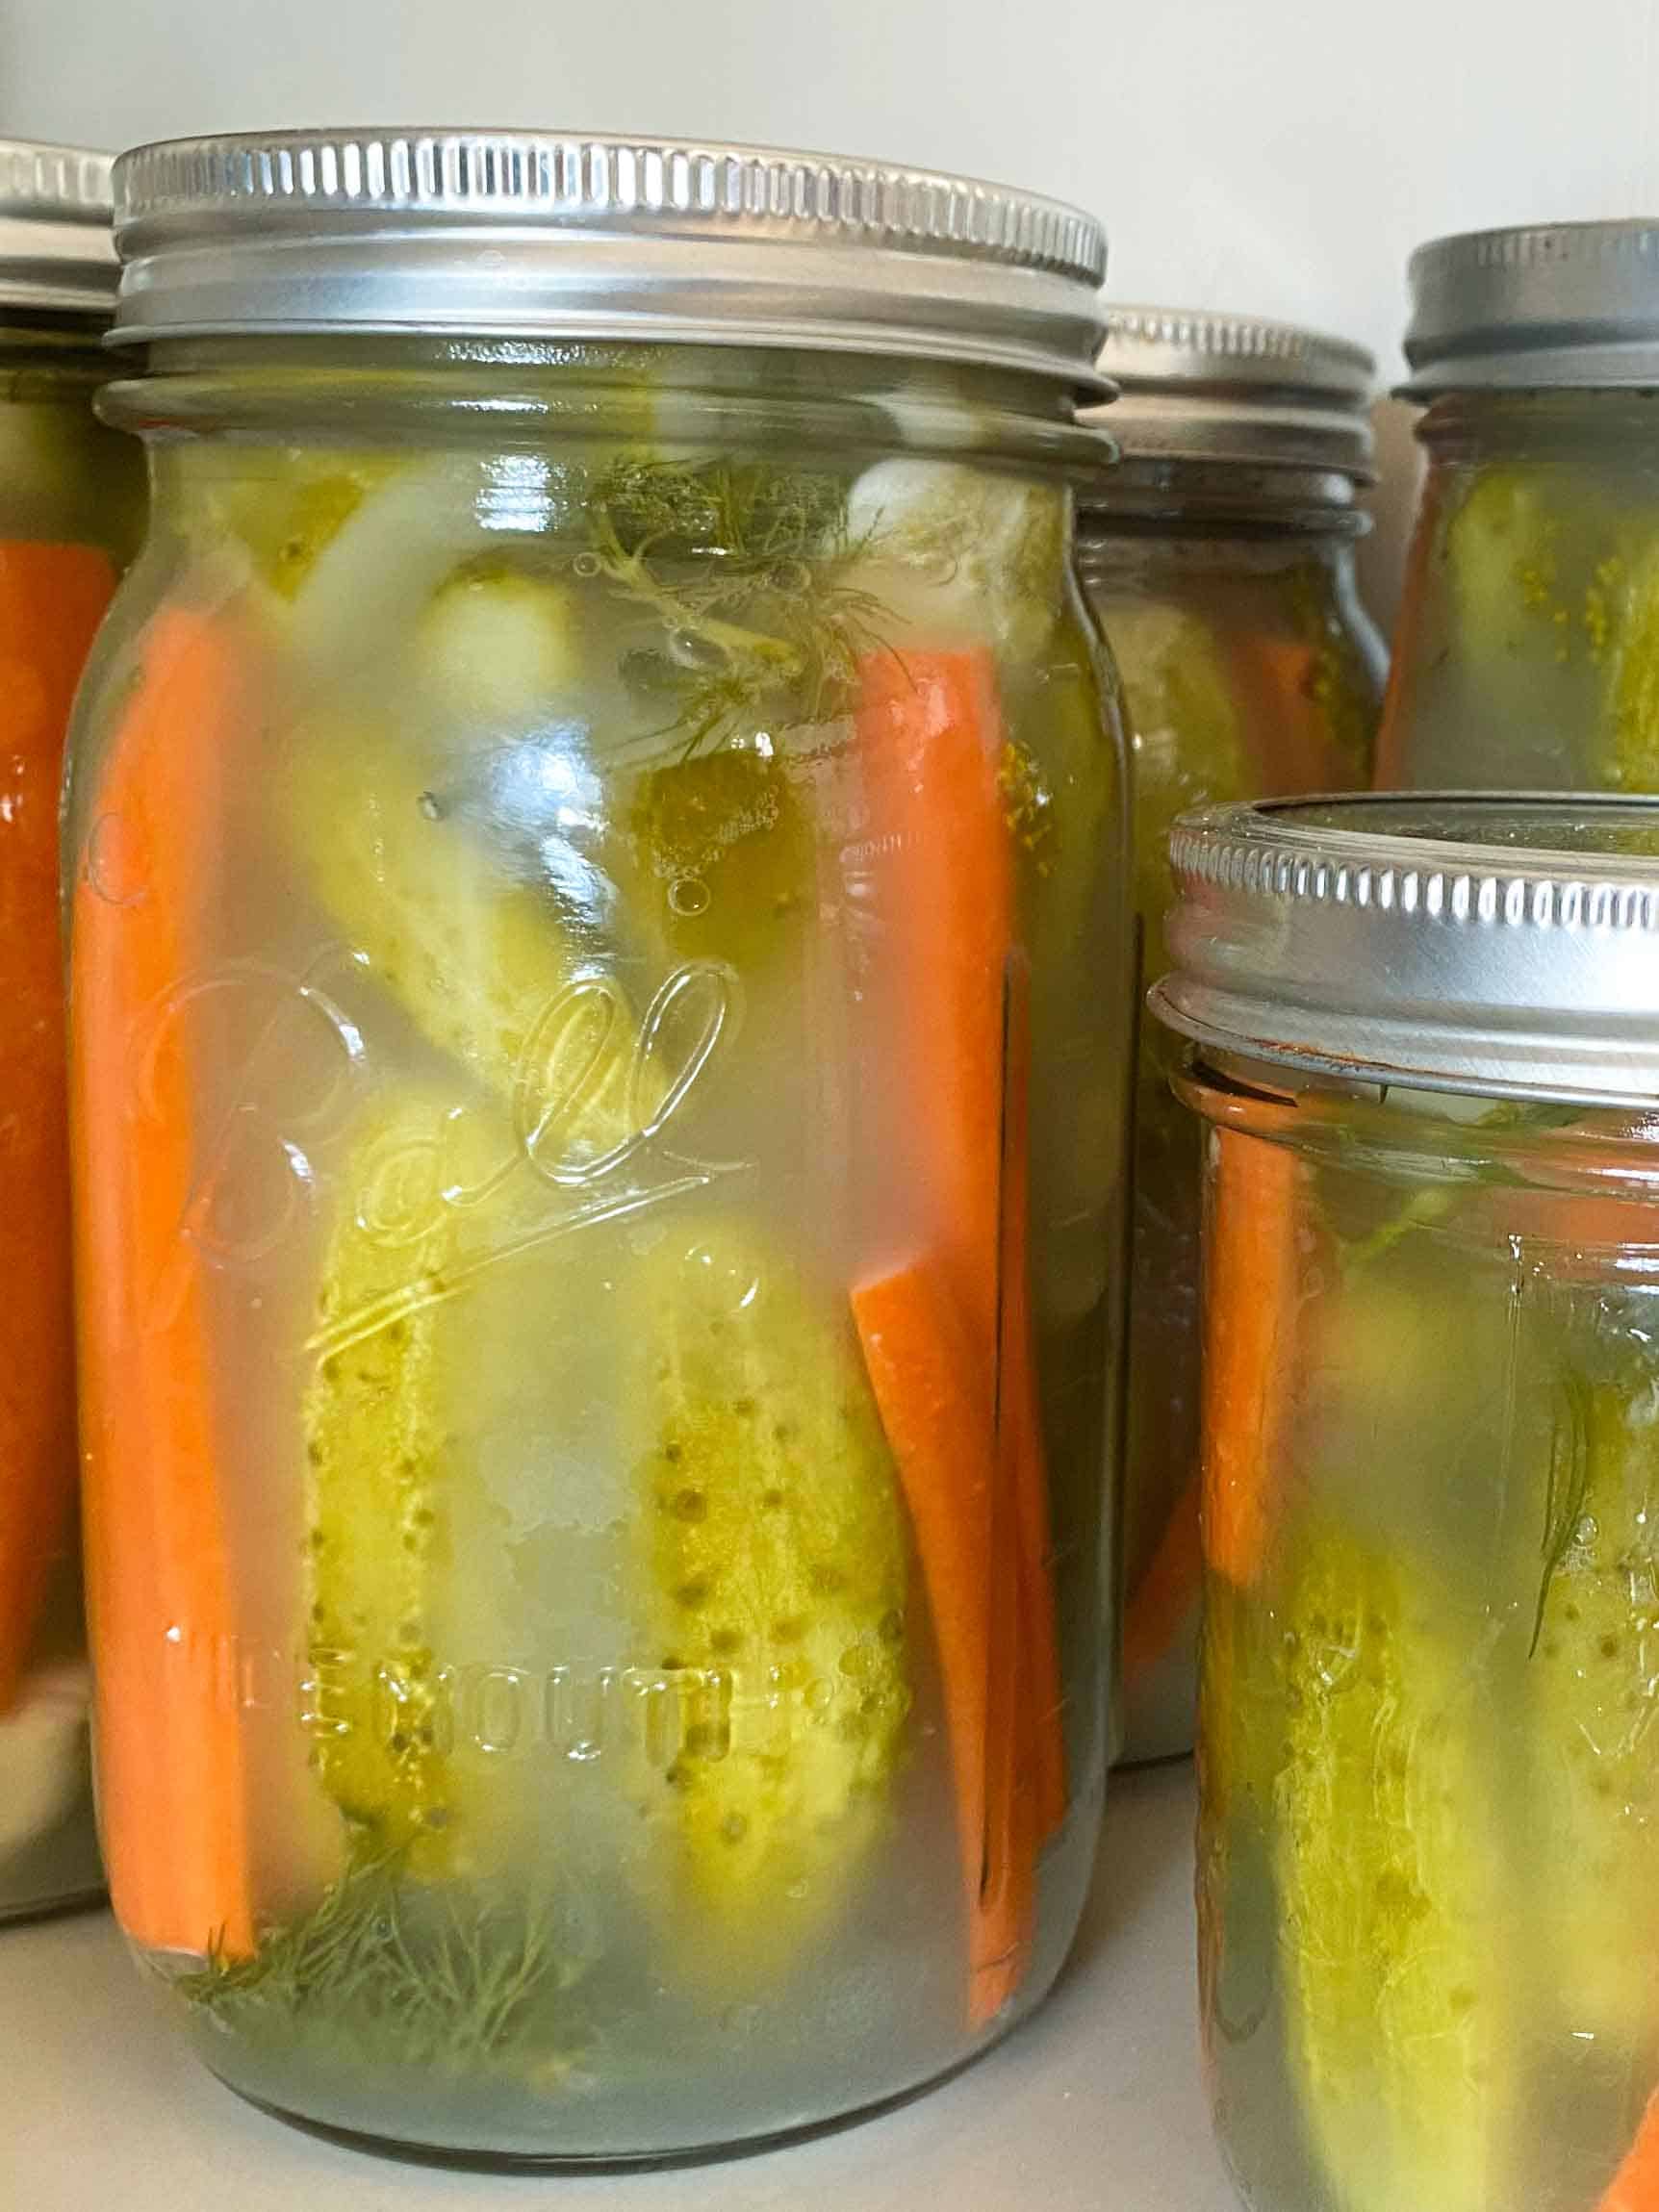 Lacto fermented pickles in cloudy brine with carrots and cucumbers visible in mason jars.